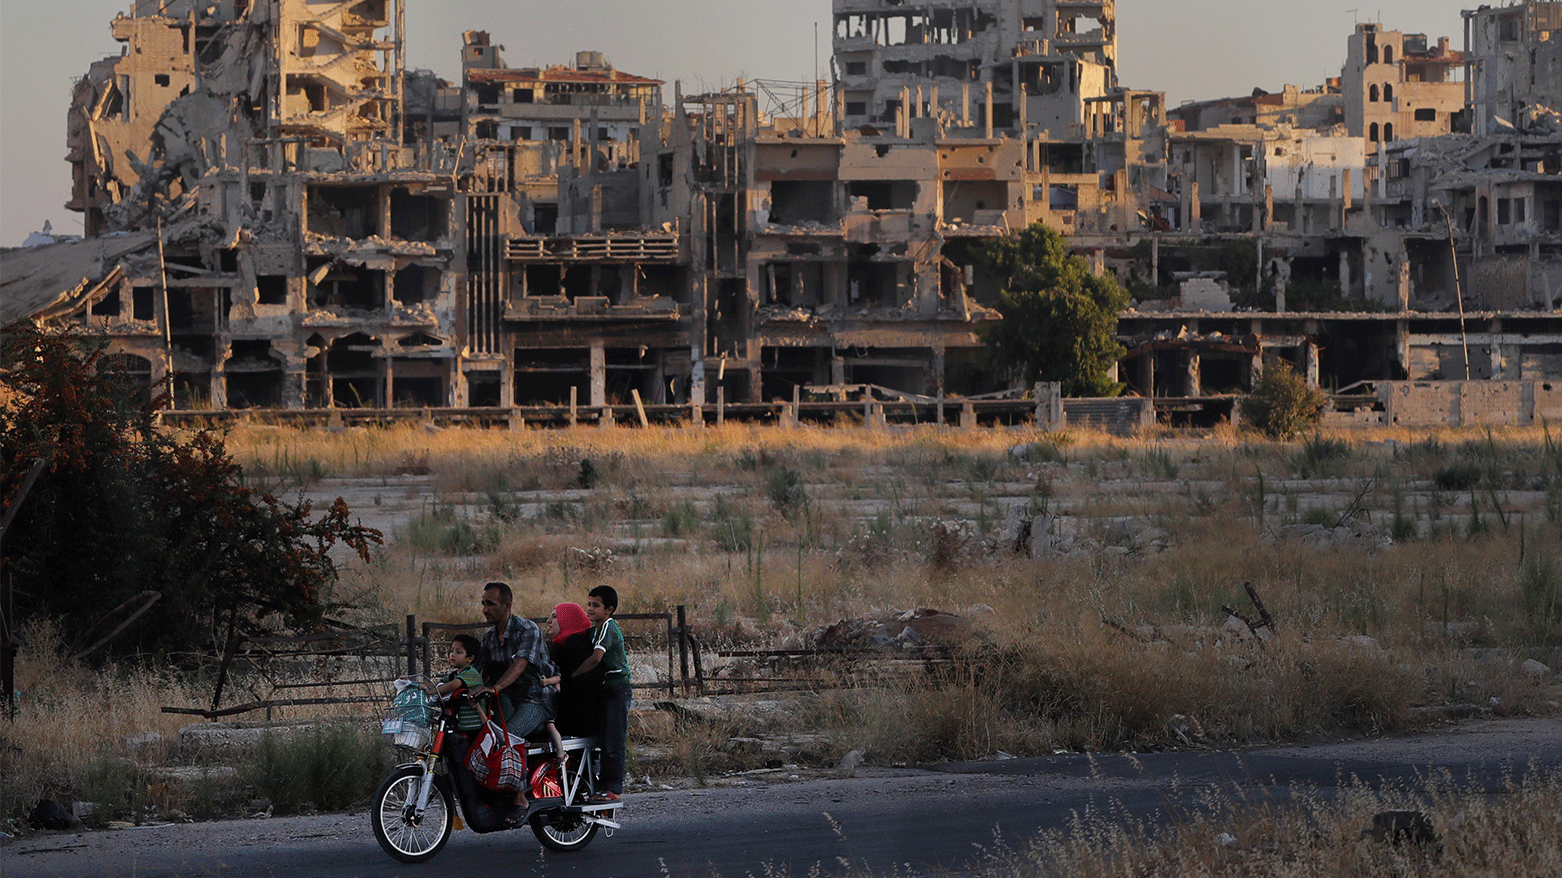 People ride their motorcycle by damaged buildings in the old town of Homs, Syria, Aug. 15, 2018. (Photo: AP)